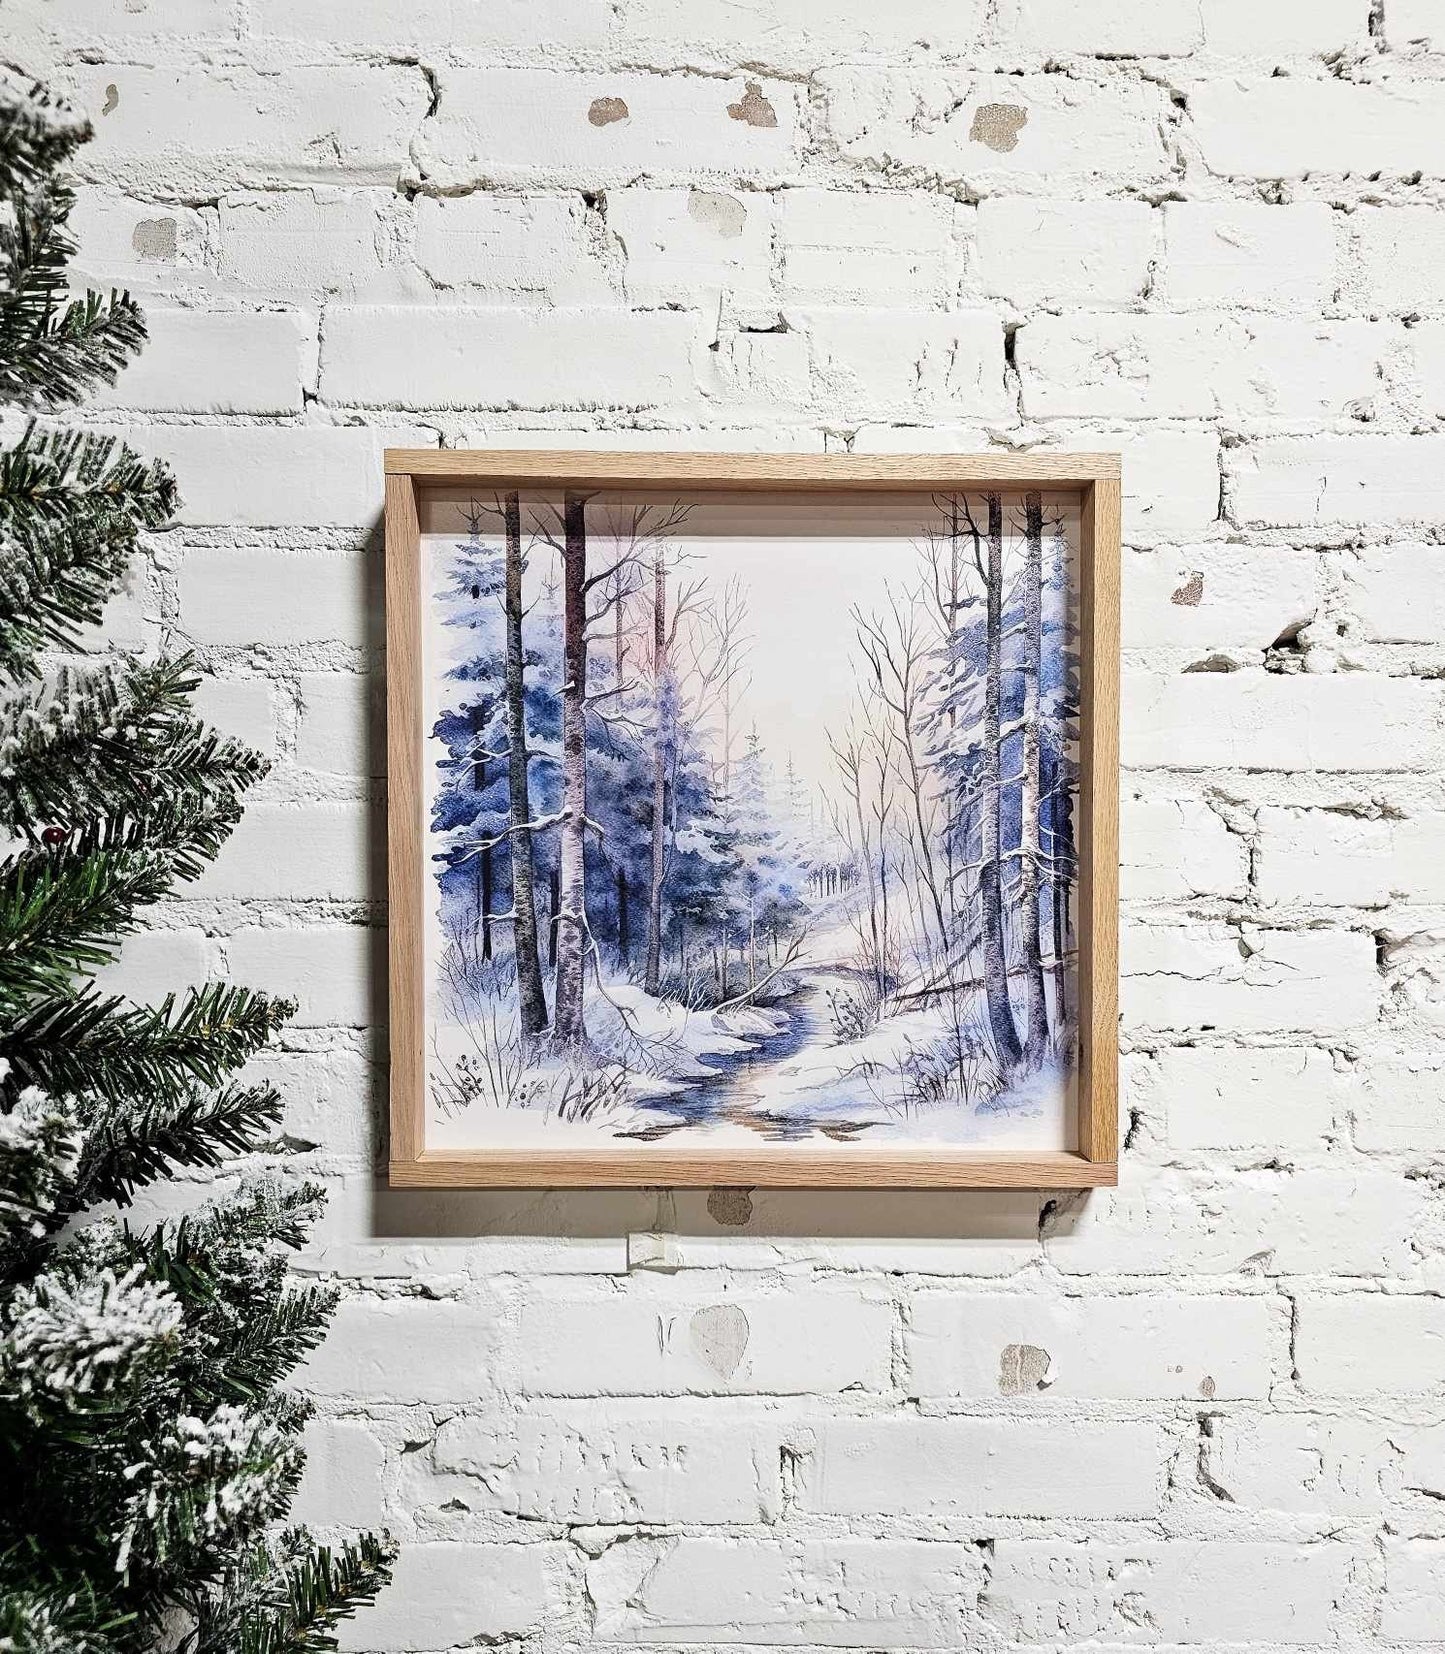 Winter Snowy Landscape Wall Art Hanging Sign, Snow Covered Trees, Trail, & Creek, Framed Canvas Wood Sign, Blue, Simple Minimal, Peaceful